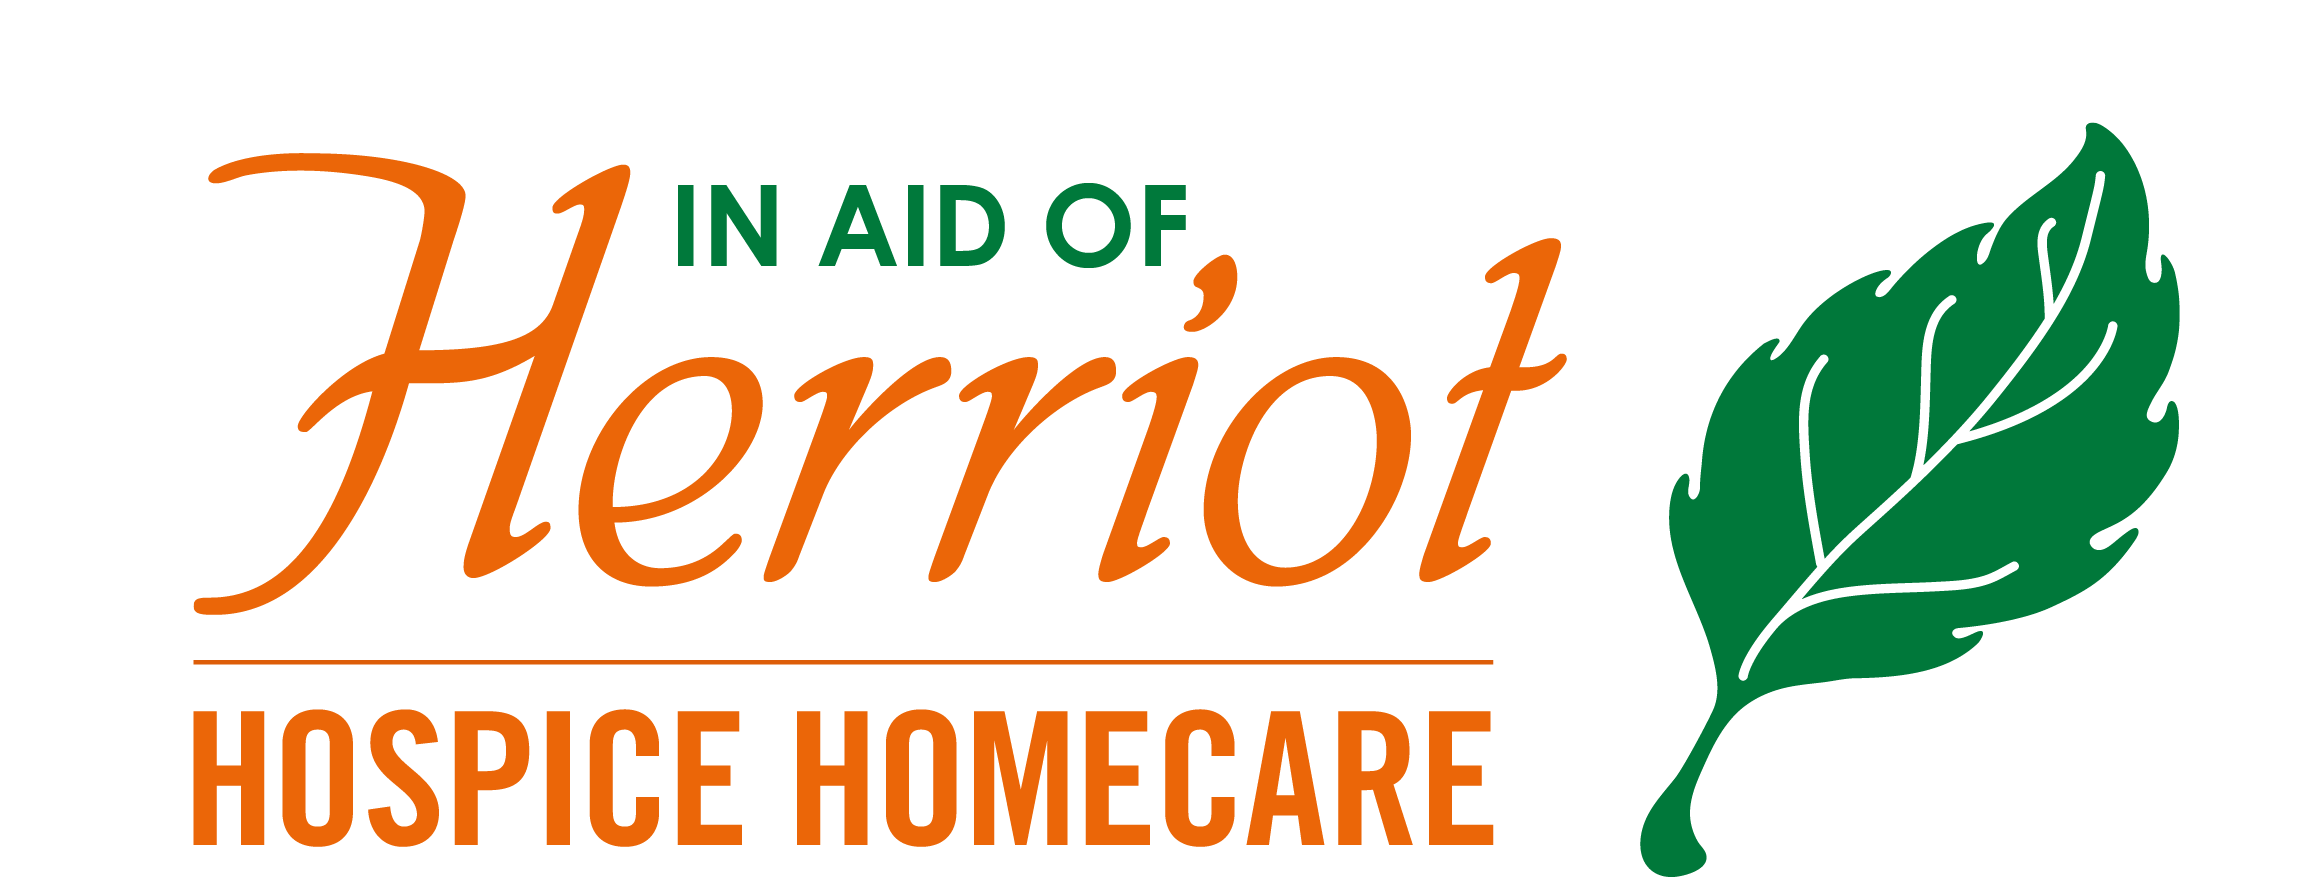 Supporting Herriot Hospice Homecare